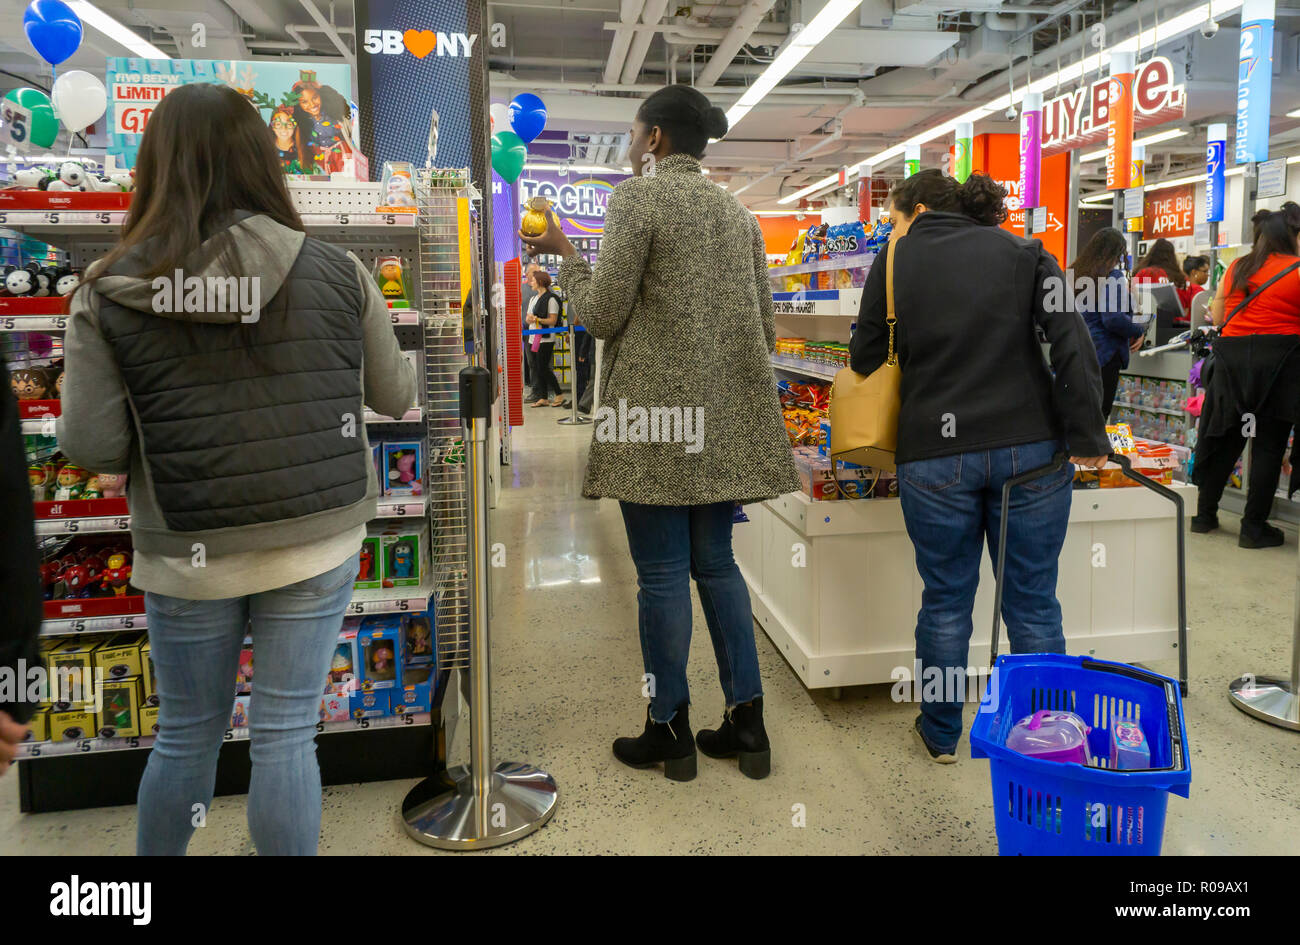 New York, USA. 2 November 2018. Shoppers invade the new Five Below discount store on prestigious Fifth Avenue in New York on its grand opening day, Friday, November 3, 2018, 2018. The 10,800 square foot location is the discounter's first in Manhattan and it is the chains 746th store. All the merchandise in the store, which ranges from clothing, to candy, to beauty supplies, and everything else in between is priced at $5 or less. Credit: Richard Levine/Alamy Live News Stock Photo